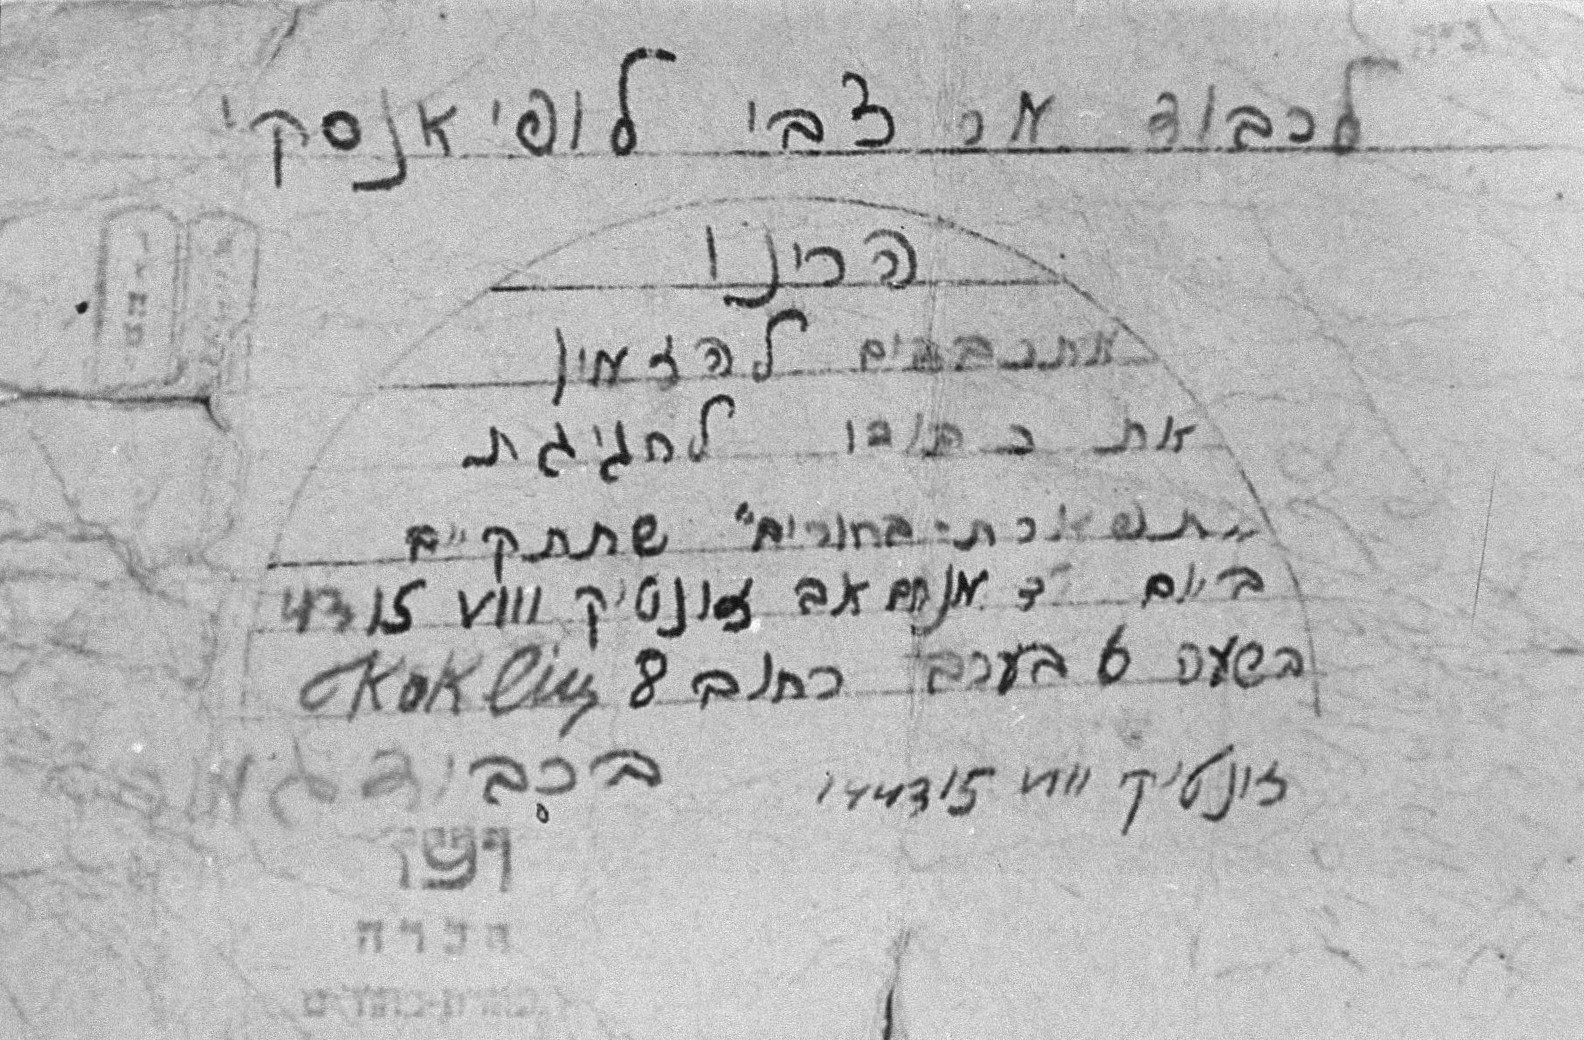 Copy of an invitation to a celebration in the Kovno ghetto religious school on August 15, 1943.  

It reads:  To Zvi Lopianski, You are cordially invited to a celebration of "Tifferet Bachurim"  group on the fourth day of Av, Sunday, August 15, 1943, 6 p.m. Asat #8.  Respectfully, the Secretariat of (unreadable)

Tifferet Bachurim (literally the splendor of youth) was the name of the religious boys school in the ghetto. Rabbi Ephraim Oshry, head of the ghetto's delousing unit, instructed the boys in Talmud, prophets, law and "musar", spiritual self-improvement three to four hours a day.  Mr. Lopiansky, to whom the invitation is addressed, was a supporter of the school and responsible for safely hiding religious books and artifacts in his barn.